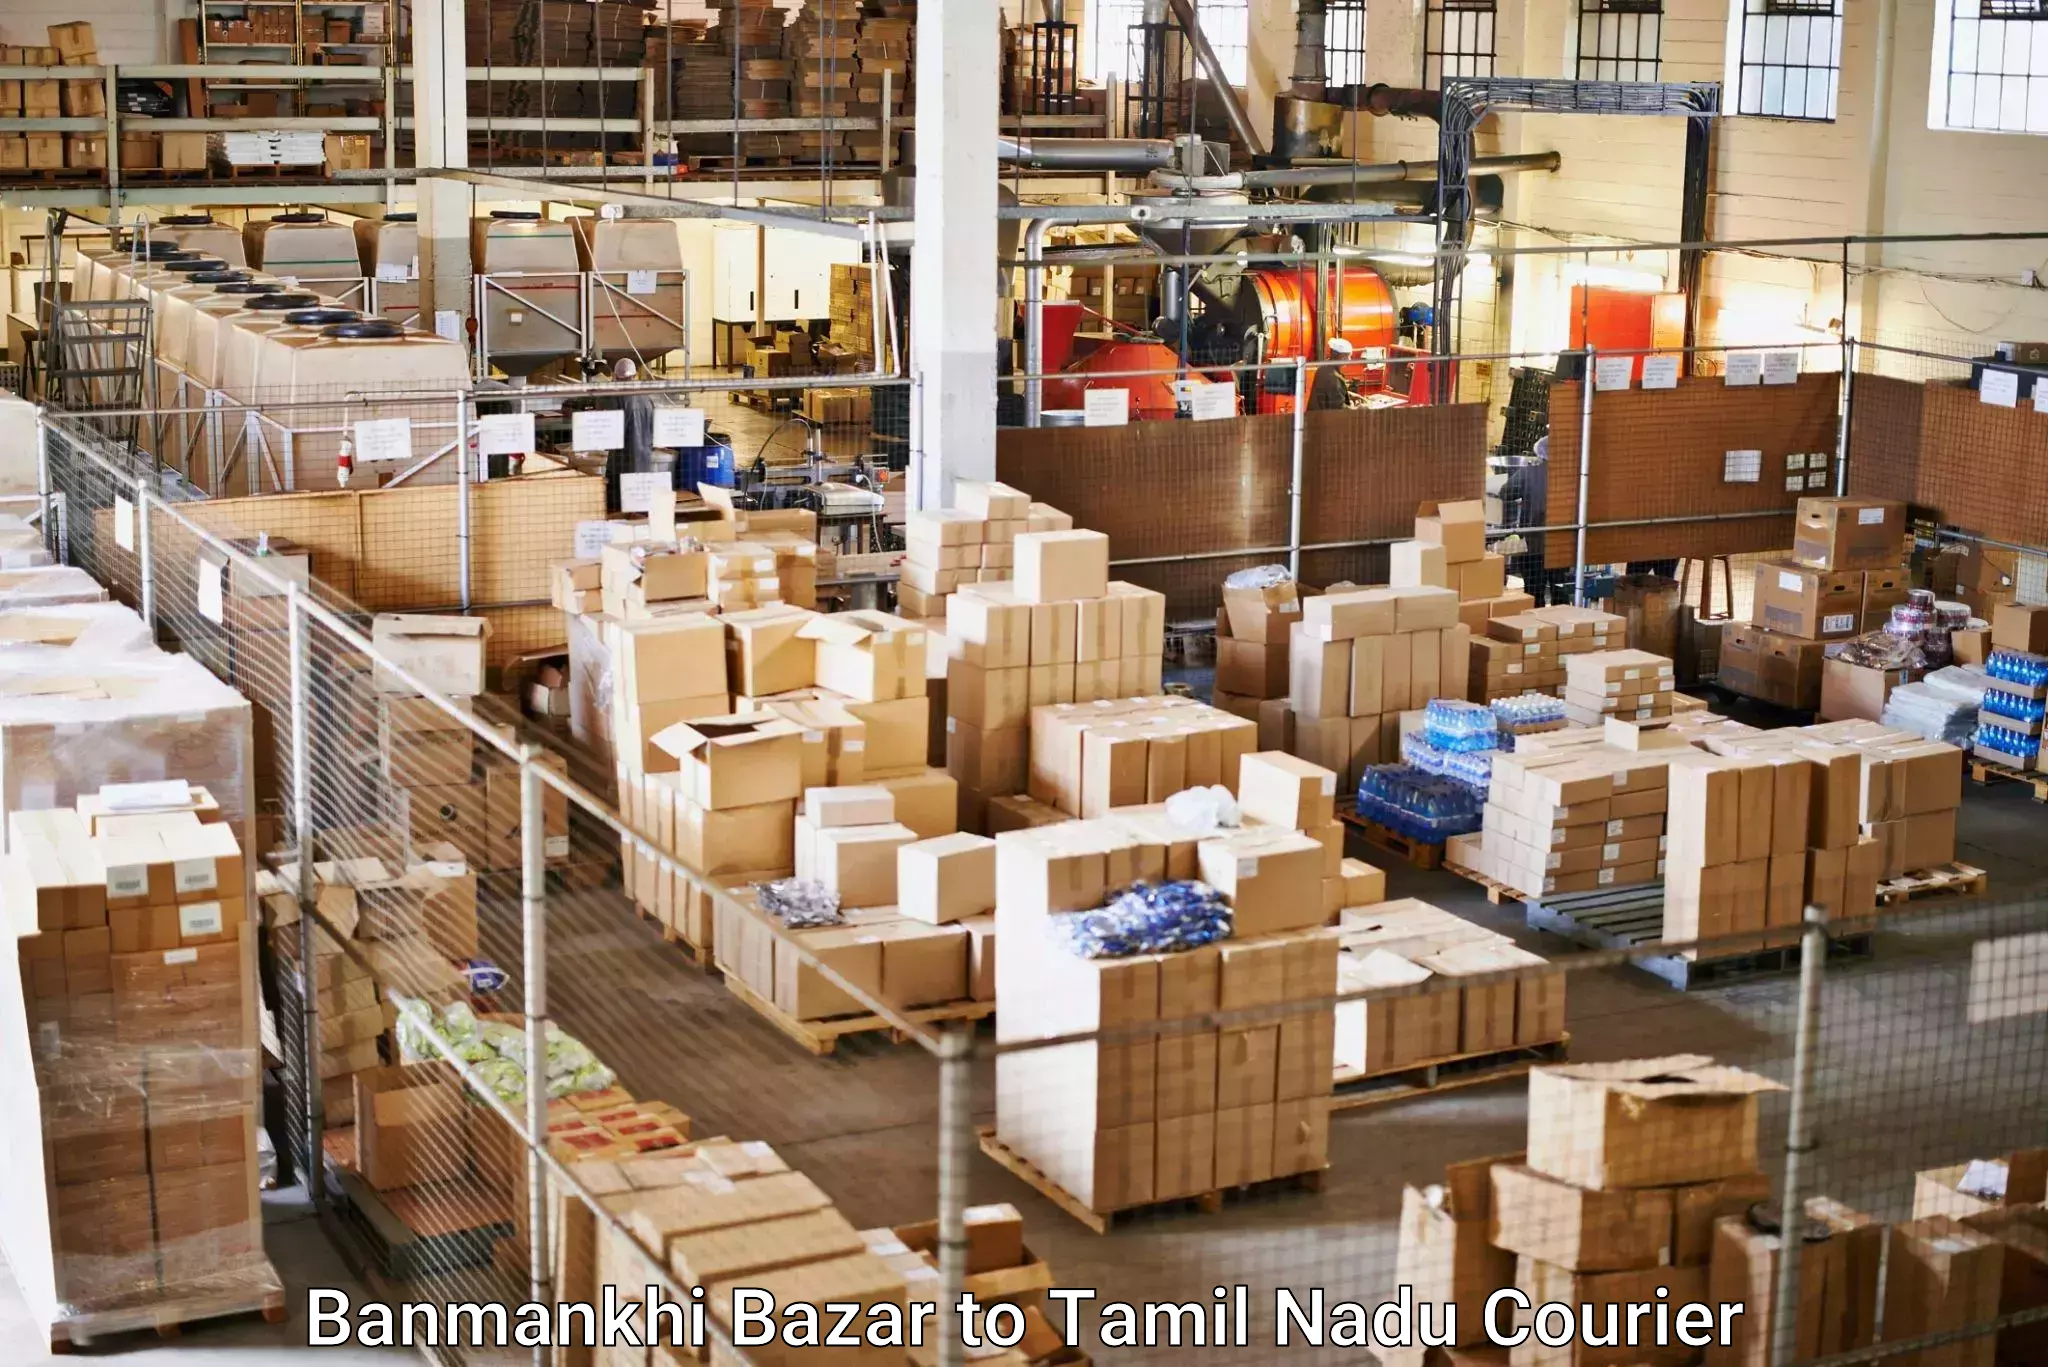 Courier service booking Banmankhi Bazar to Tallakulam